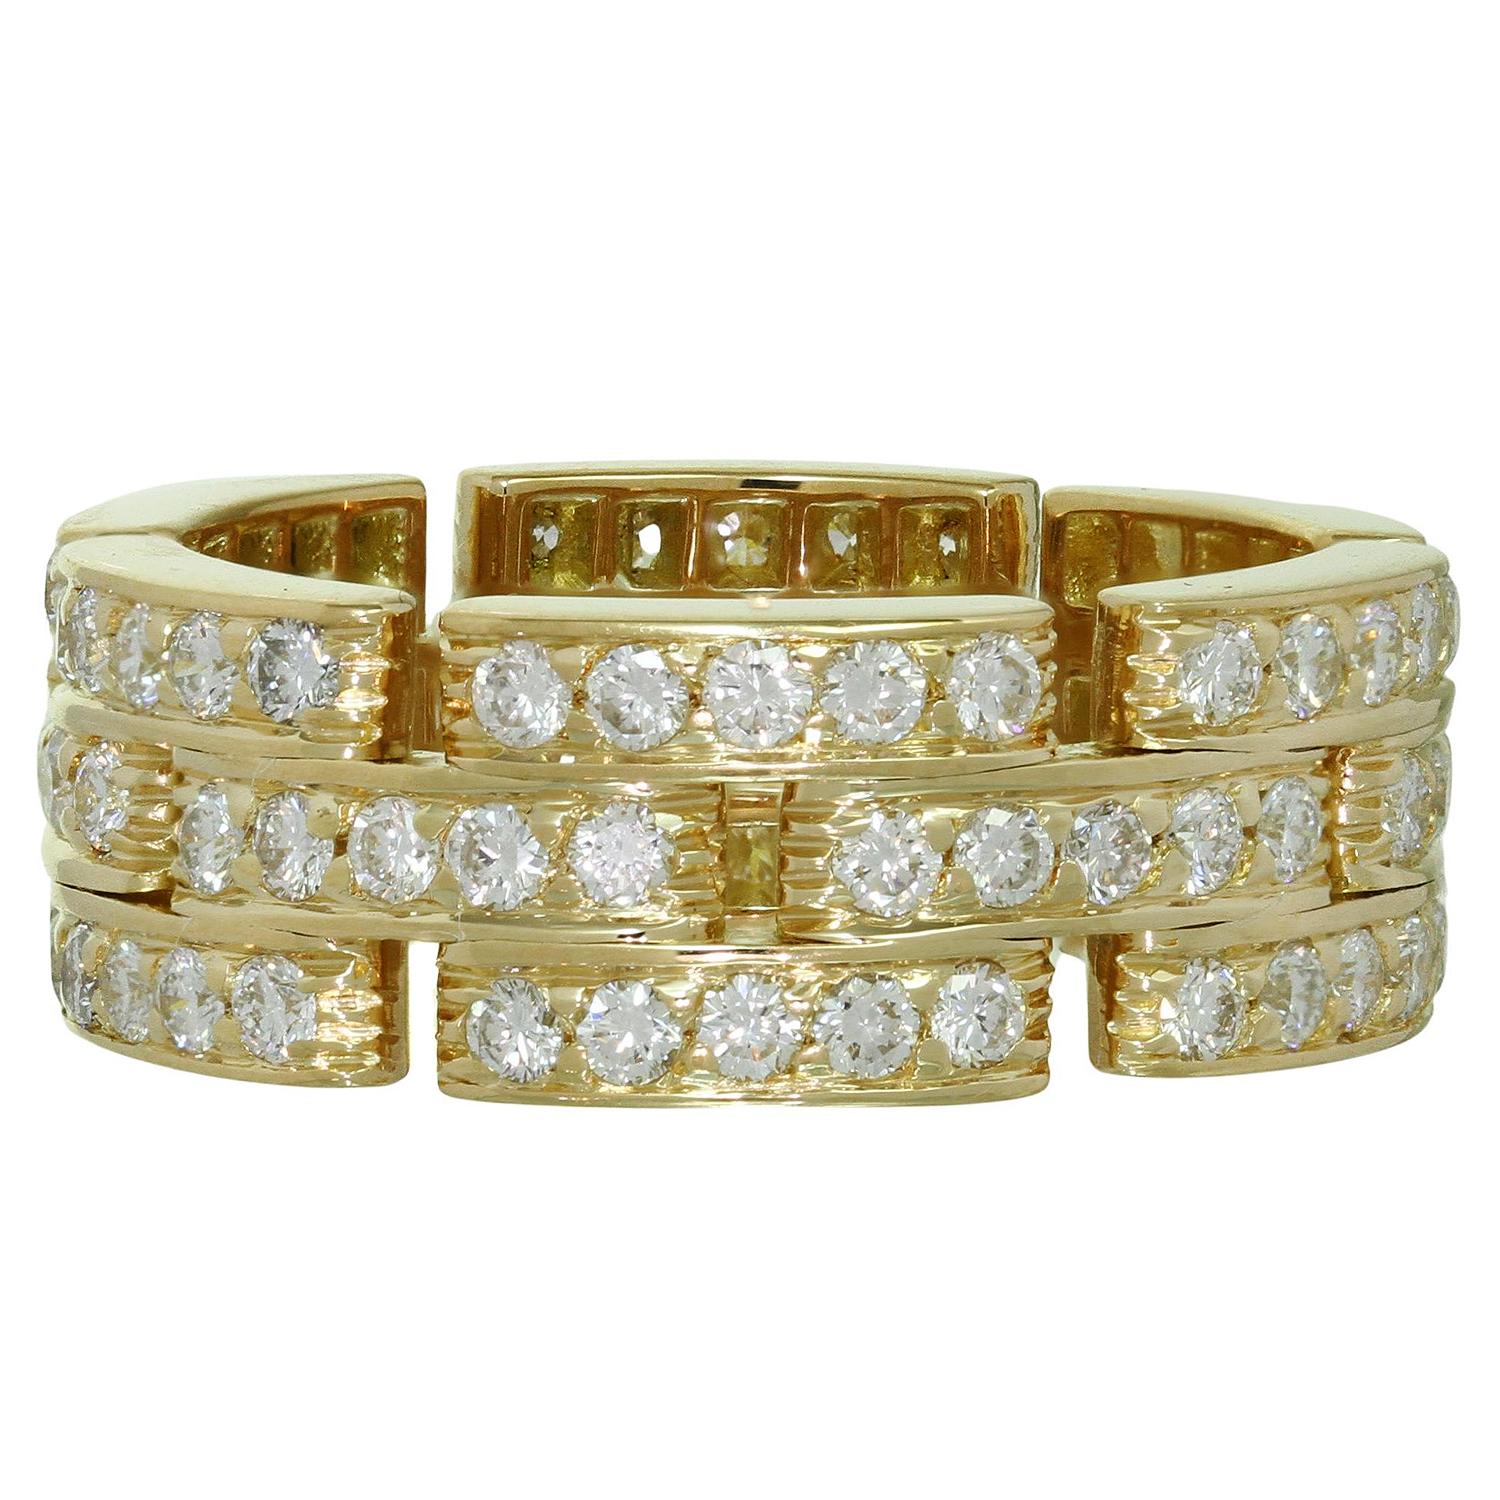 Cartier Maillon Panthere Full Diamond 18k Yellow Gold 3 Row Ring In Excellent Condition For Sale In New York, NY